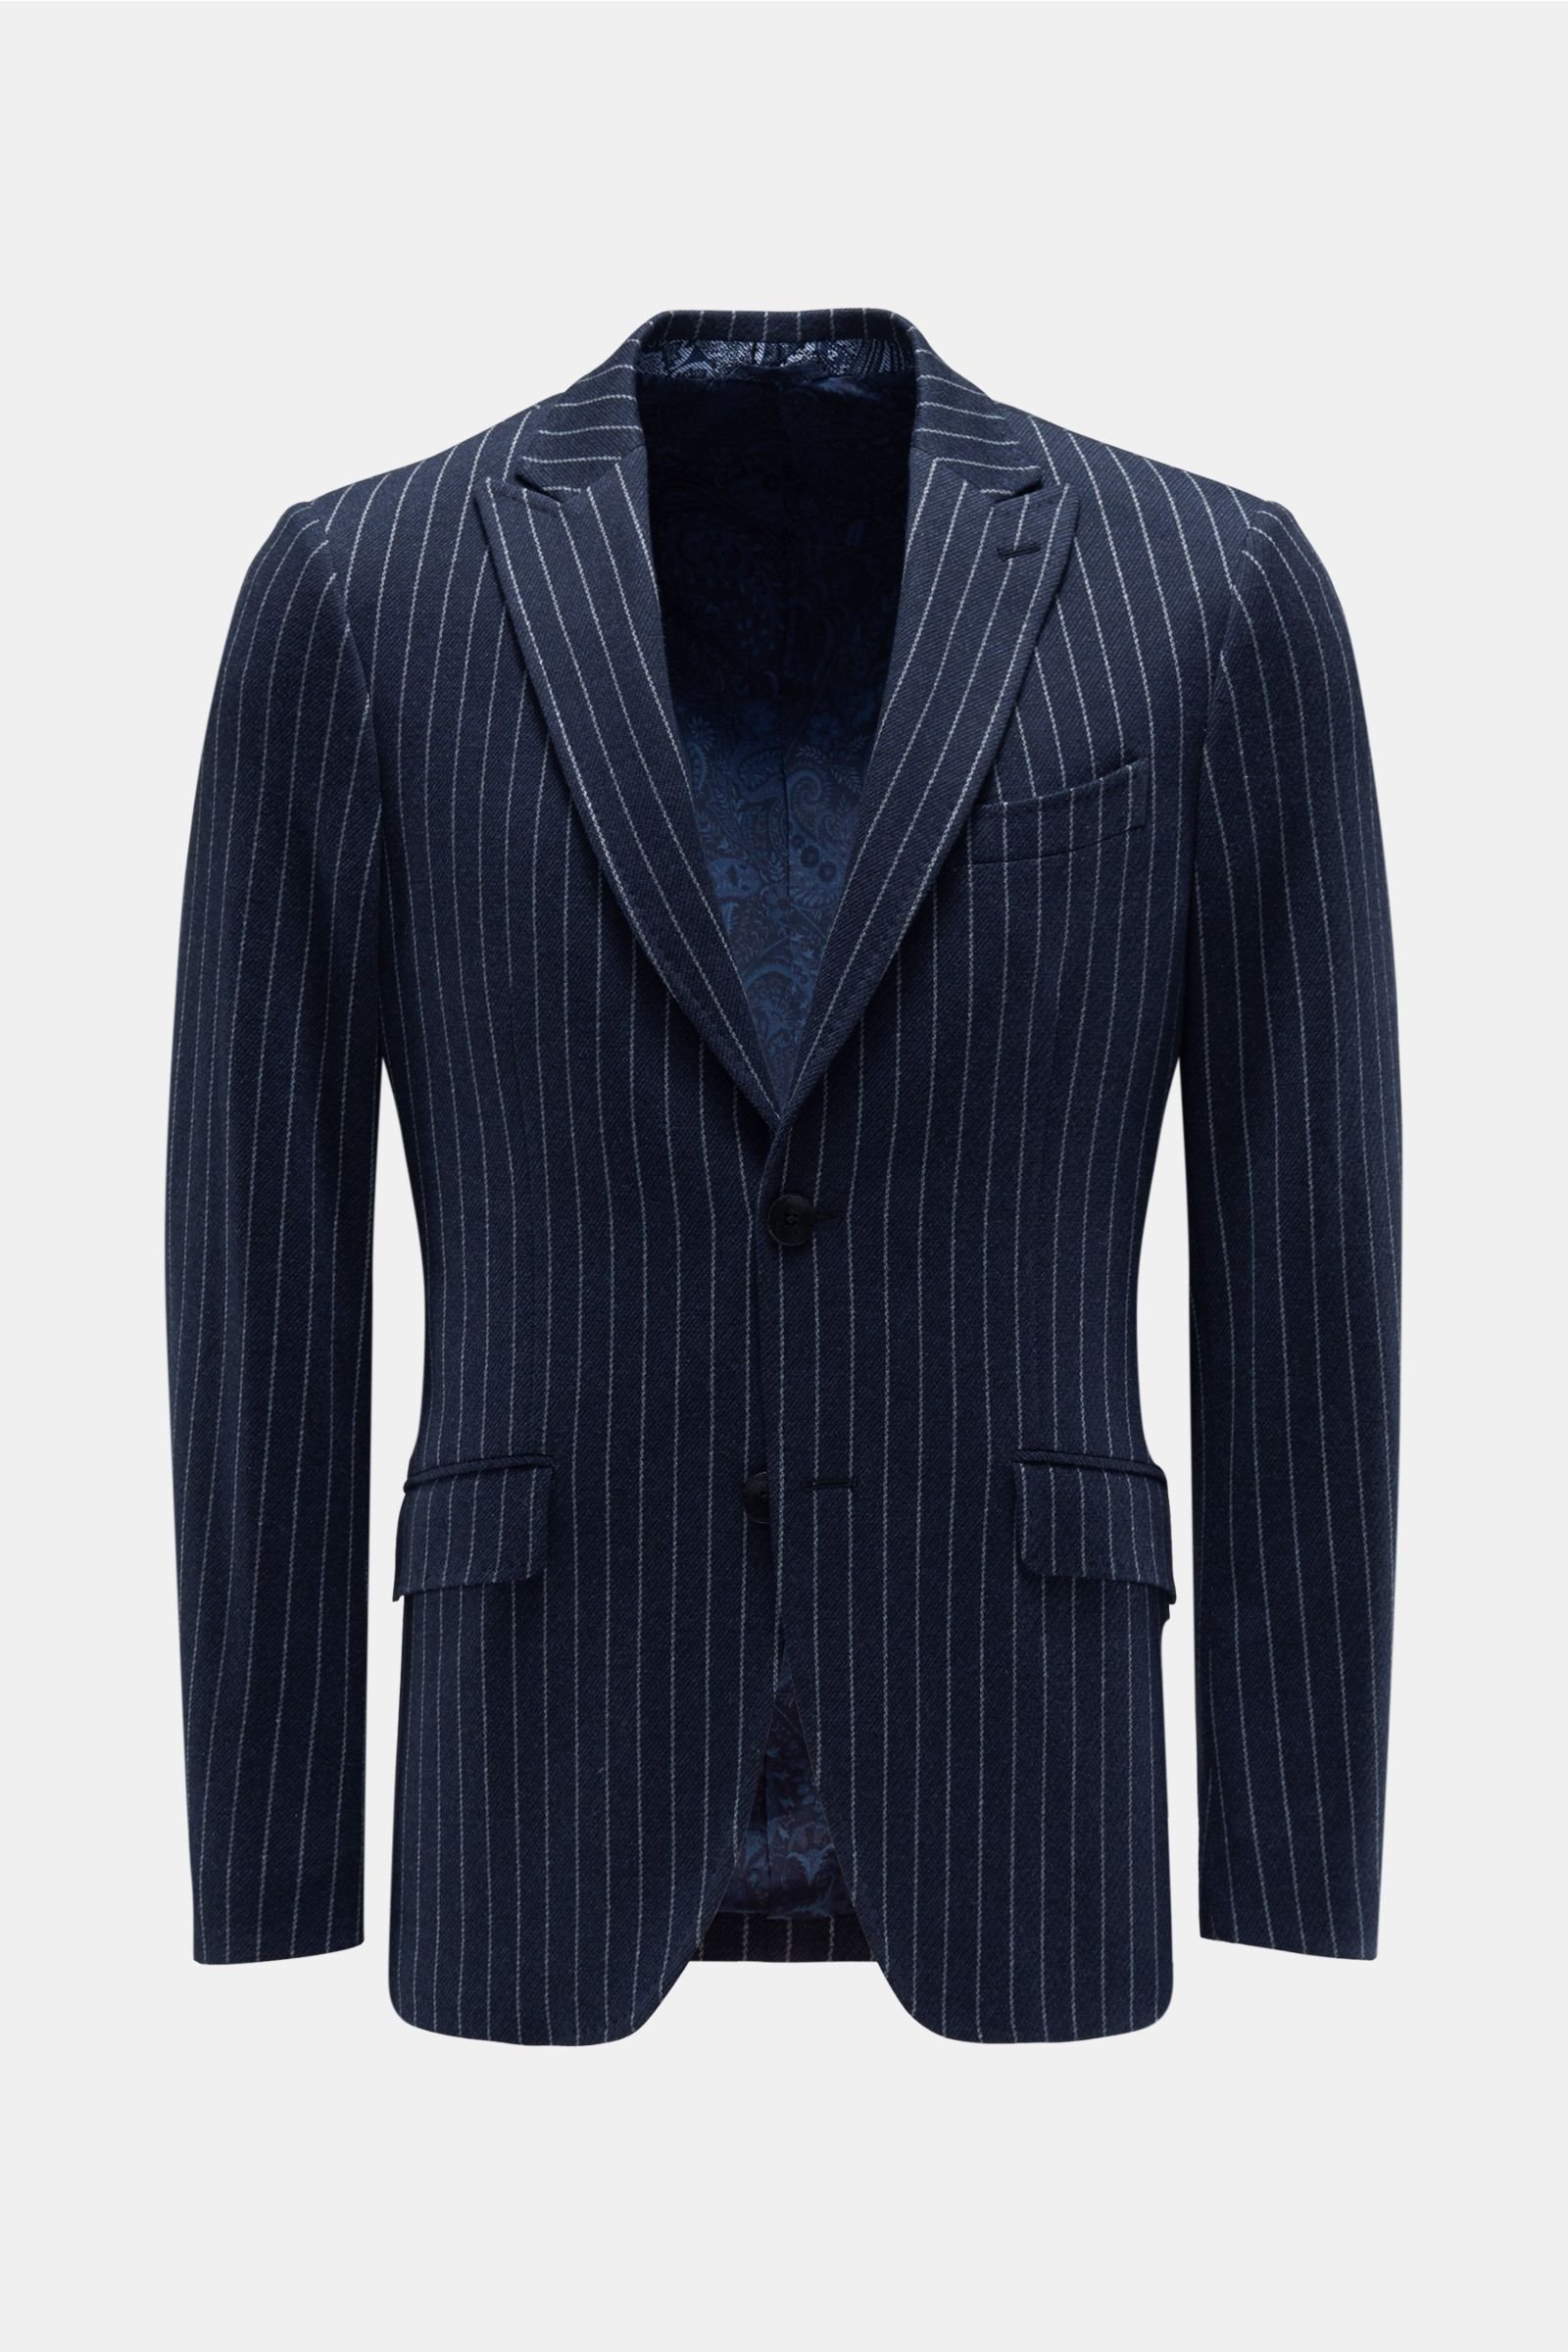 Smart-casual jacket navy striped